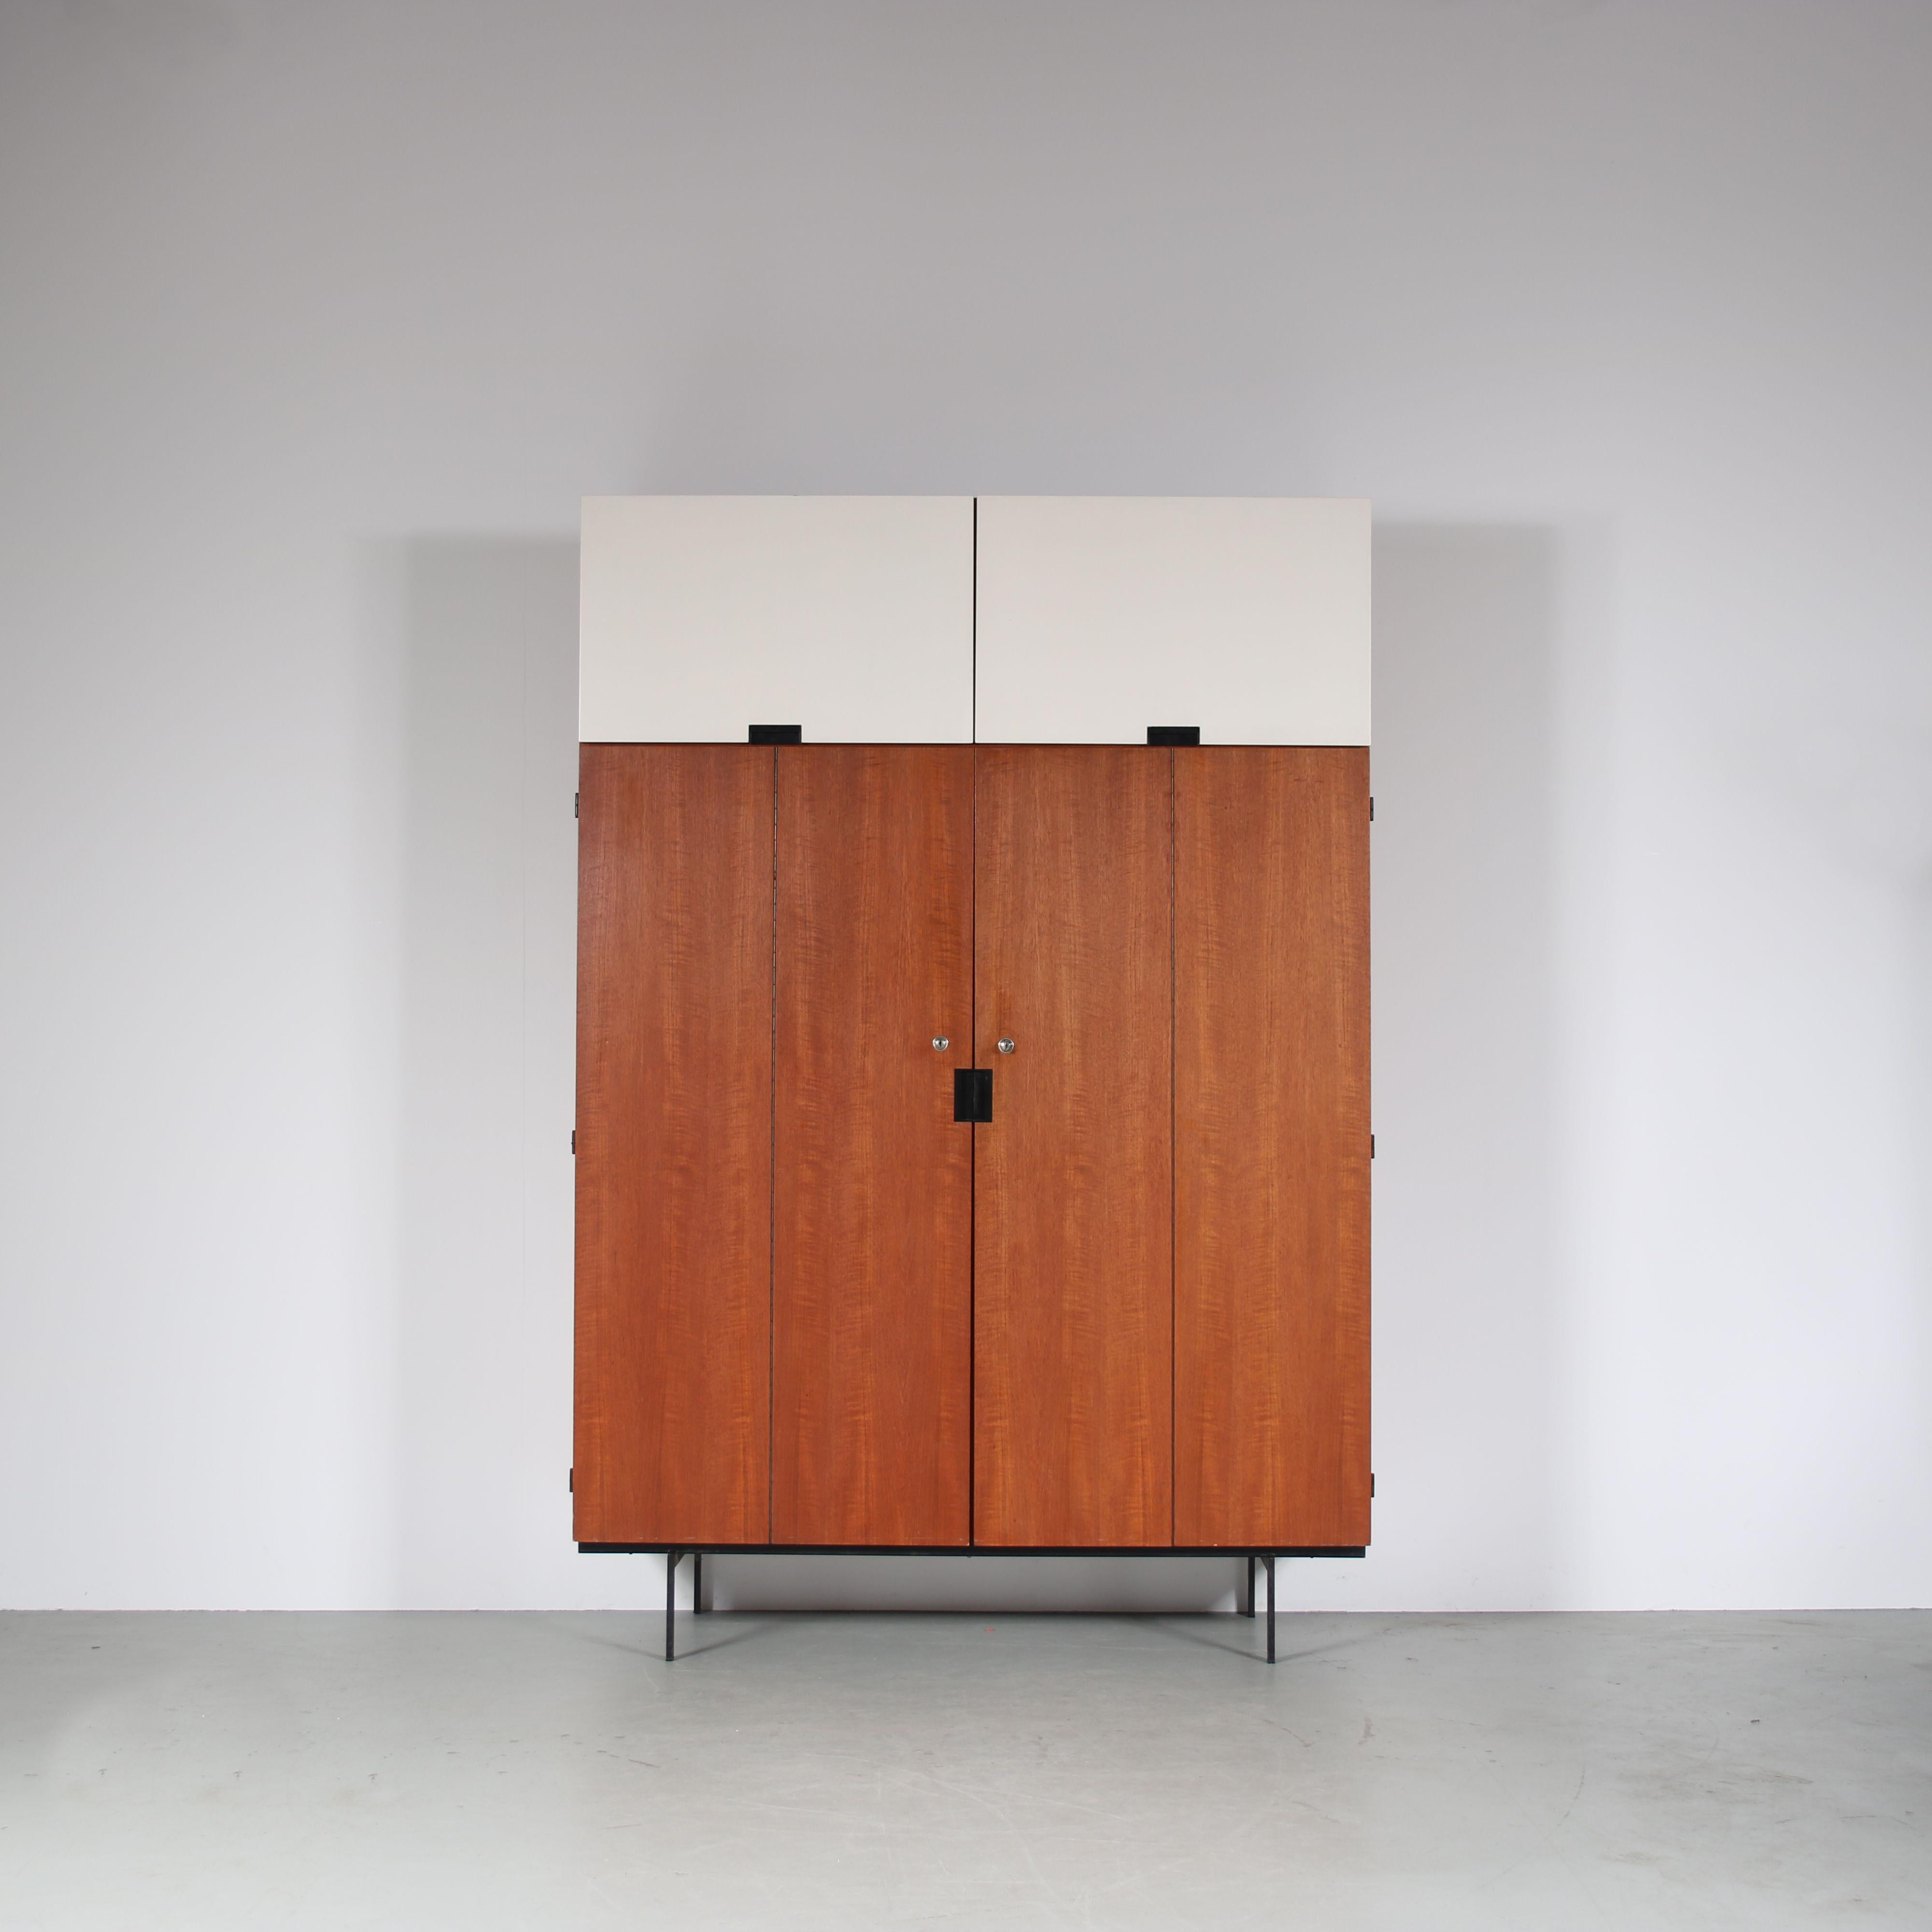 A fantastic wardrobe, model KU10 from the Japanese series designed by Cees Braakman, manufactured by Pastoe in the Netherlands, circa 1950.

This iconic and much sought-after piece of Dutch design is made from the highest quality teak wood on a